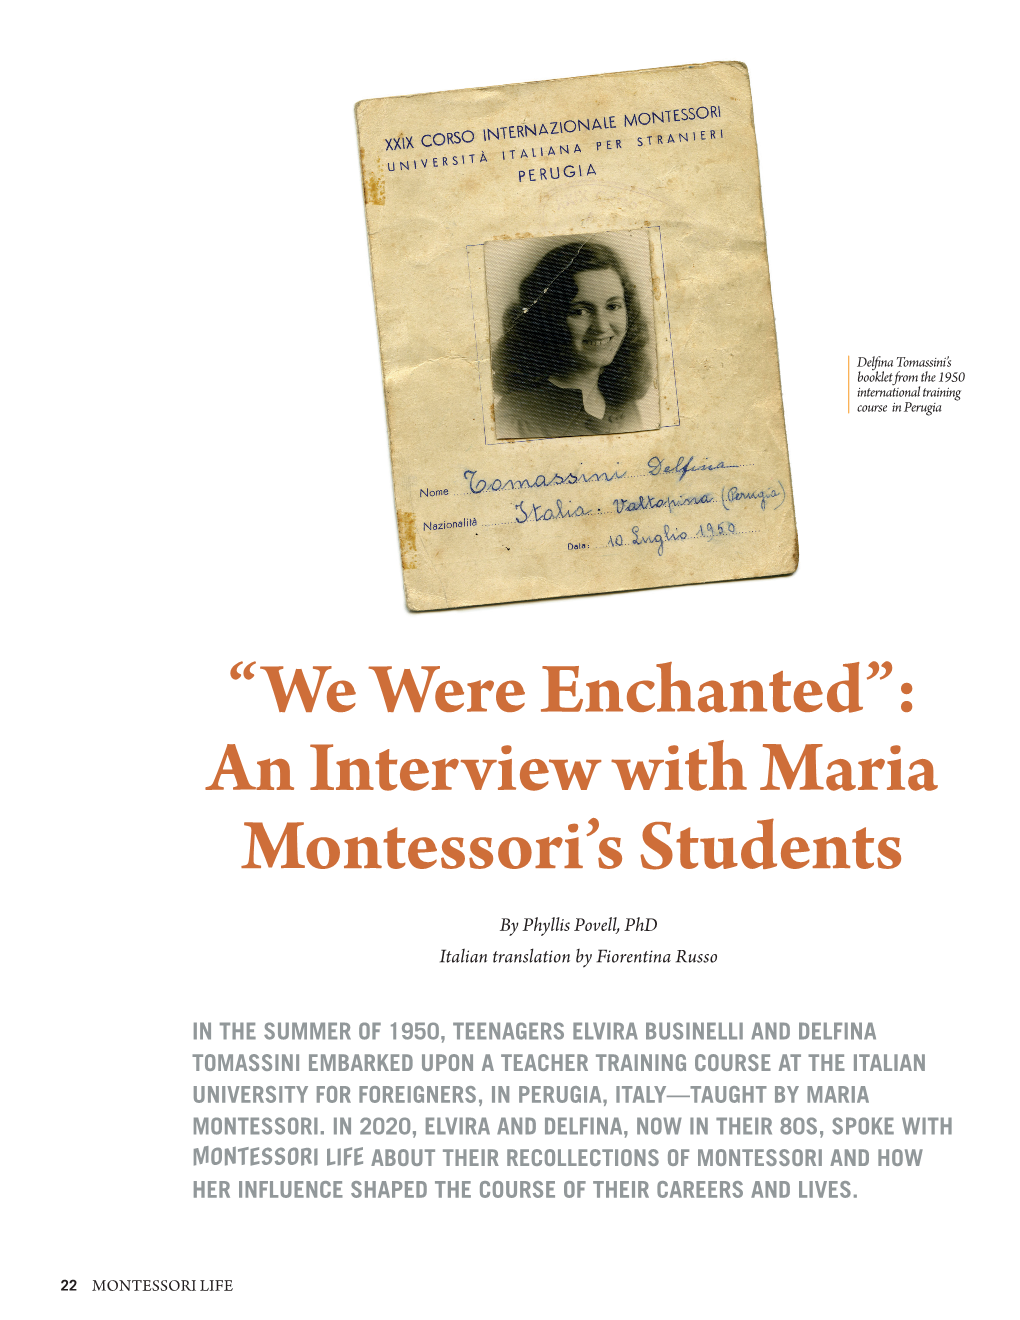 “We Were Enchanted”: an Interview with Maria Montessori's Students